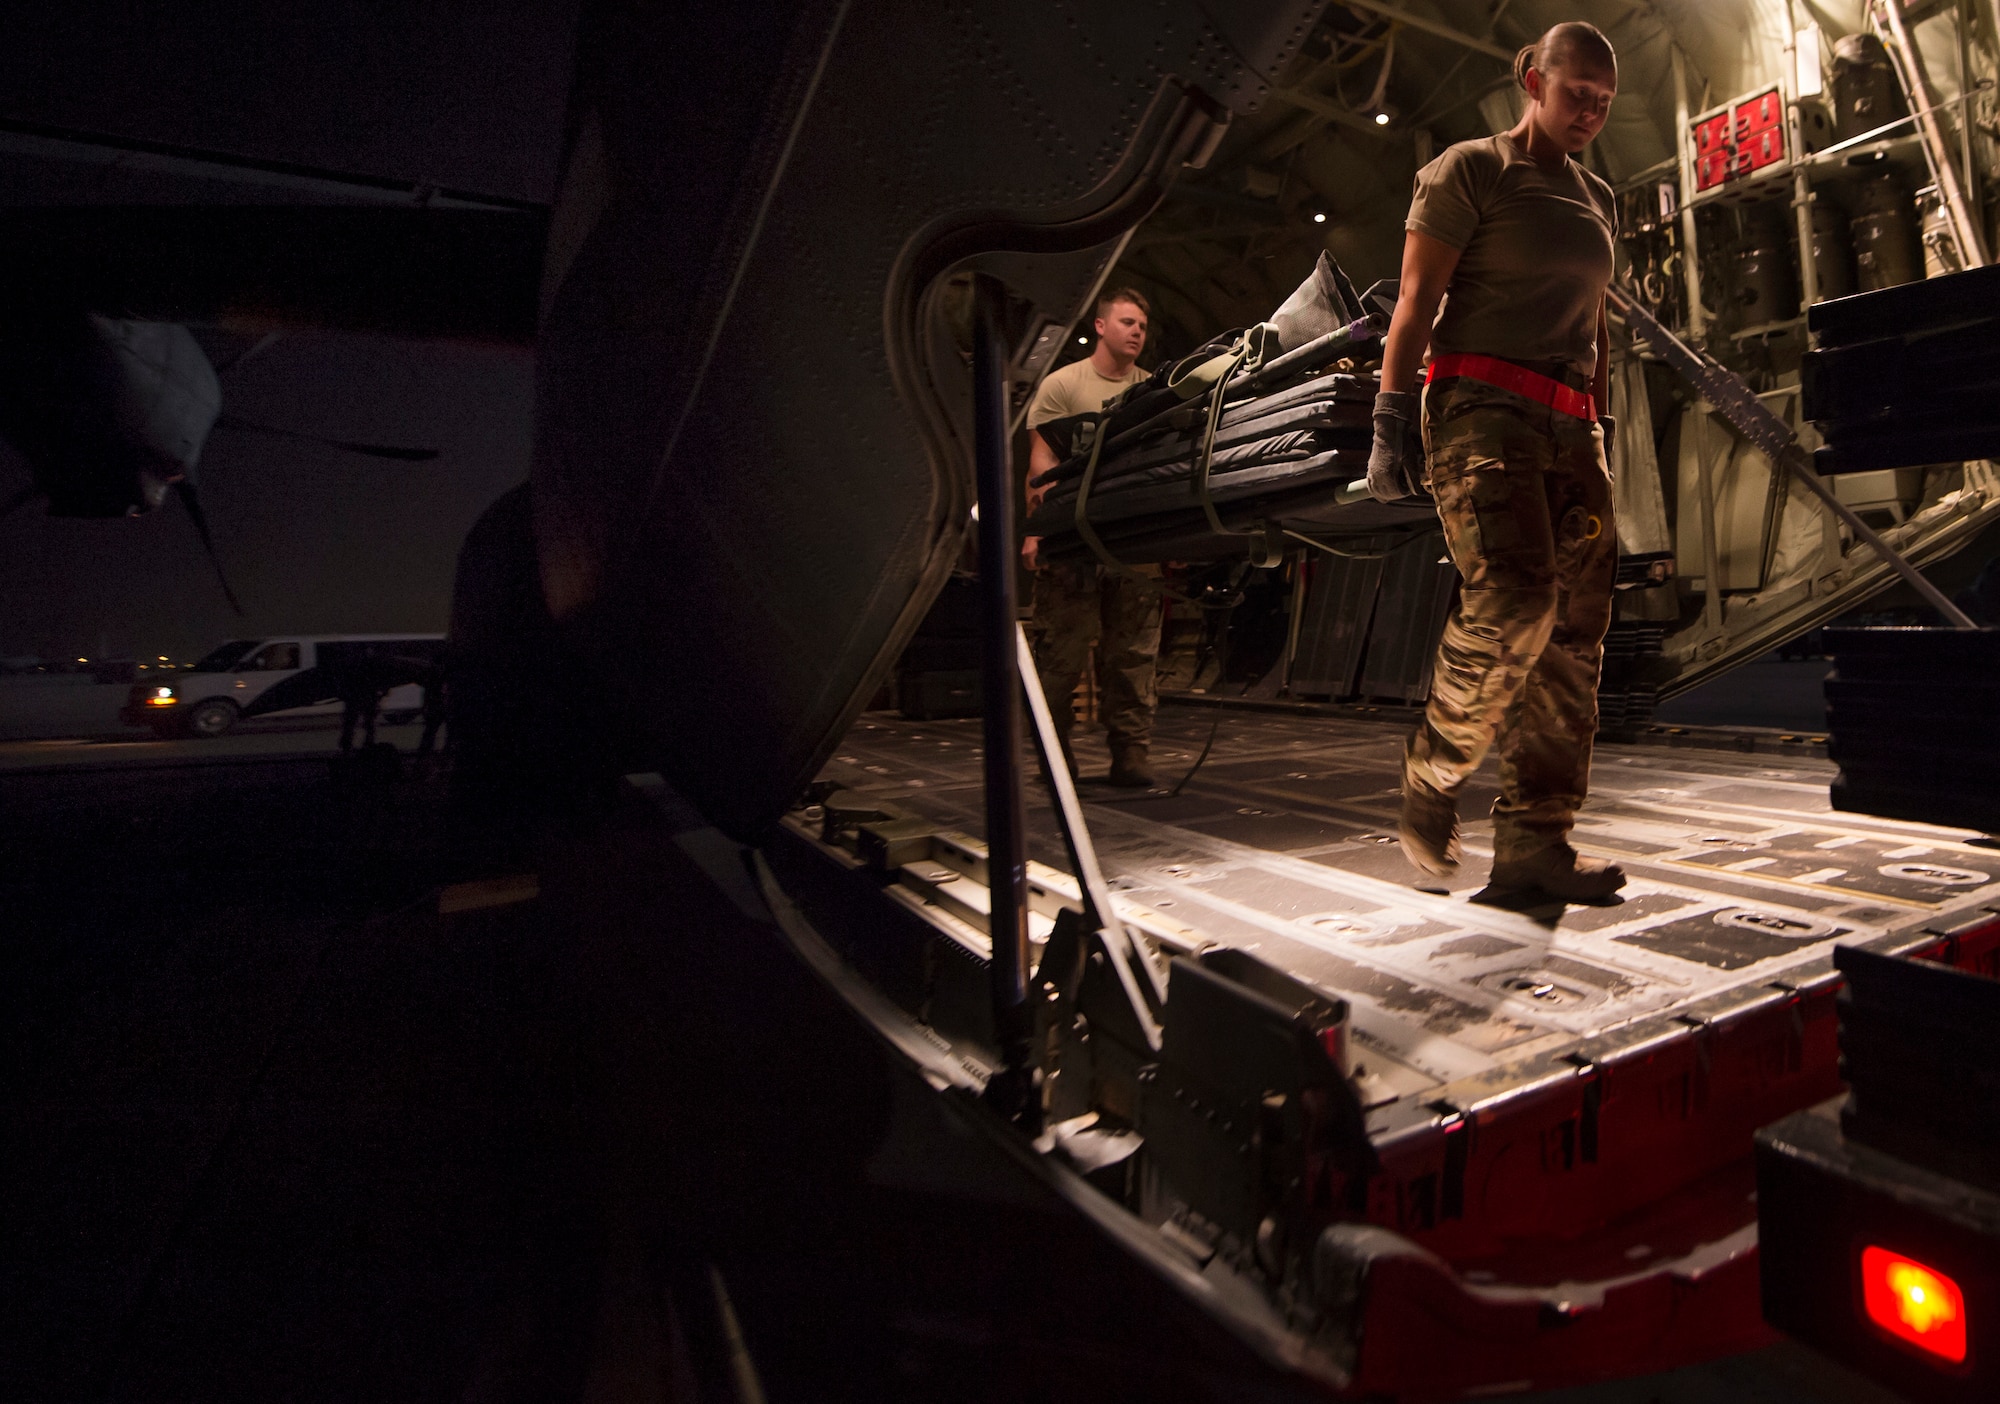 From left, Senior Airman Robert McCabe and Staff Sgt. Lyndsey Glotfelty, 379th Expeditionary Aeromedical Evacuation Squadron (EAES) aeromedical evacuation technicians, move medical equipment onto a truck at Al Udeid Air Base, Qatar, after a recent aeromedical evacuation.